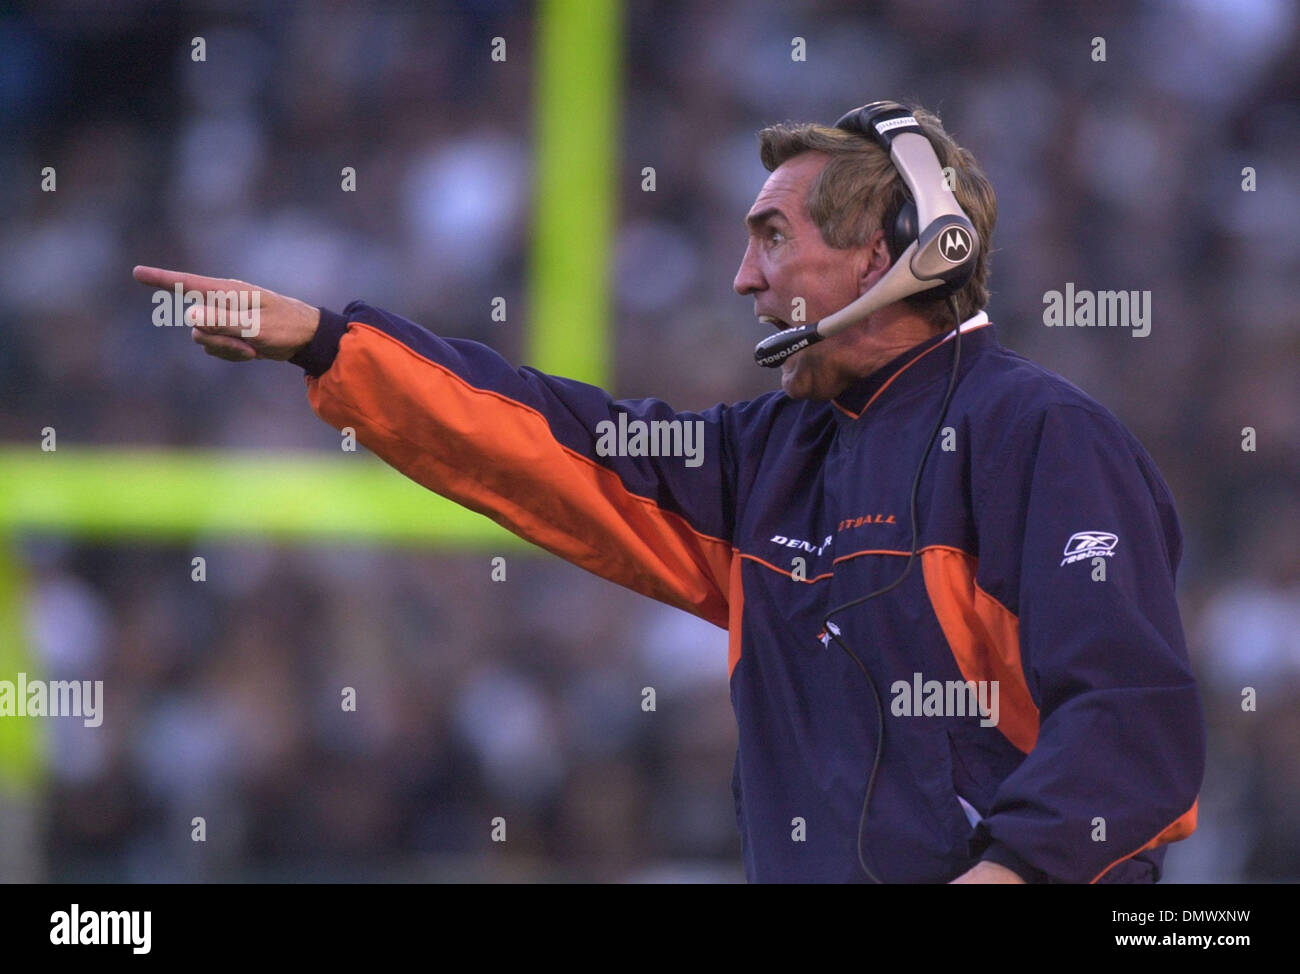 Dec 22, 2002; Oakland, CA, USA; Denver Broncos head coach Mike Shanahan yells at his players after Lenny Walls, #35, received a penalty during a punt return in the 4th quarter of their game on Sunday, December 22, 2002 at Network Associates Coliseum in Oakland, Calif. The Raiders beat Denver 28-16. Stock Photo